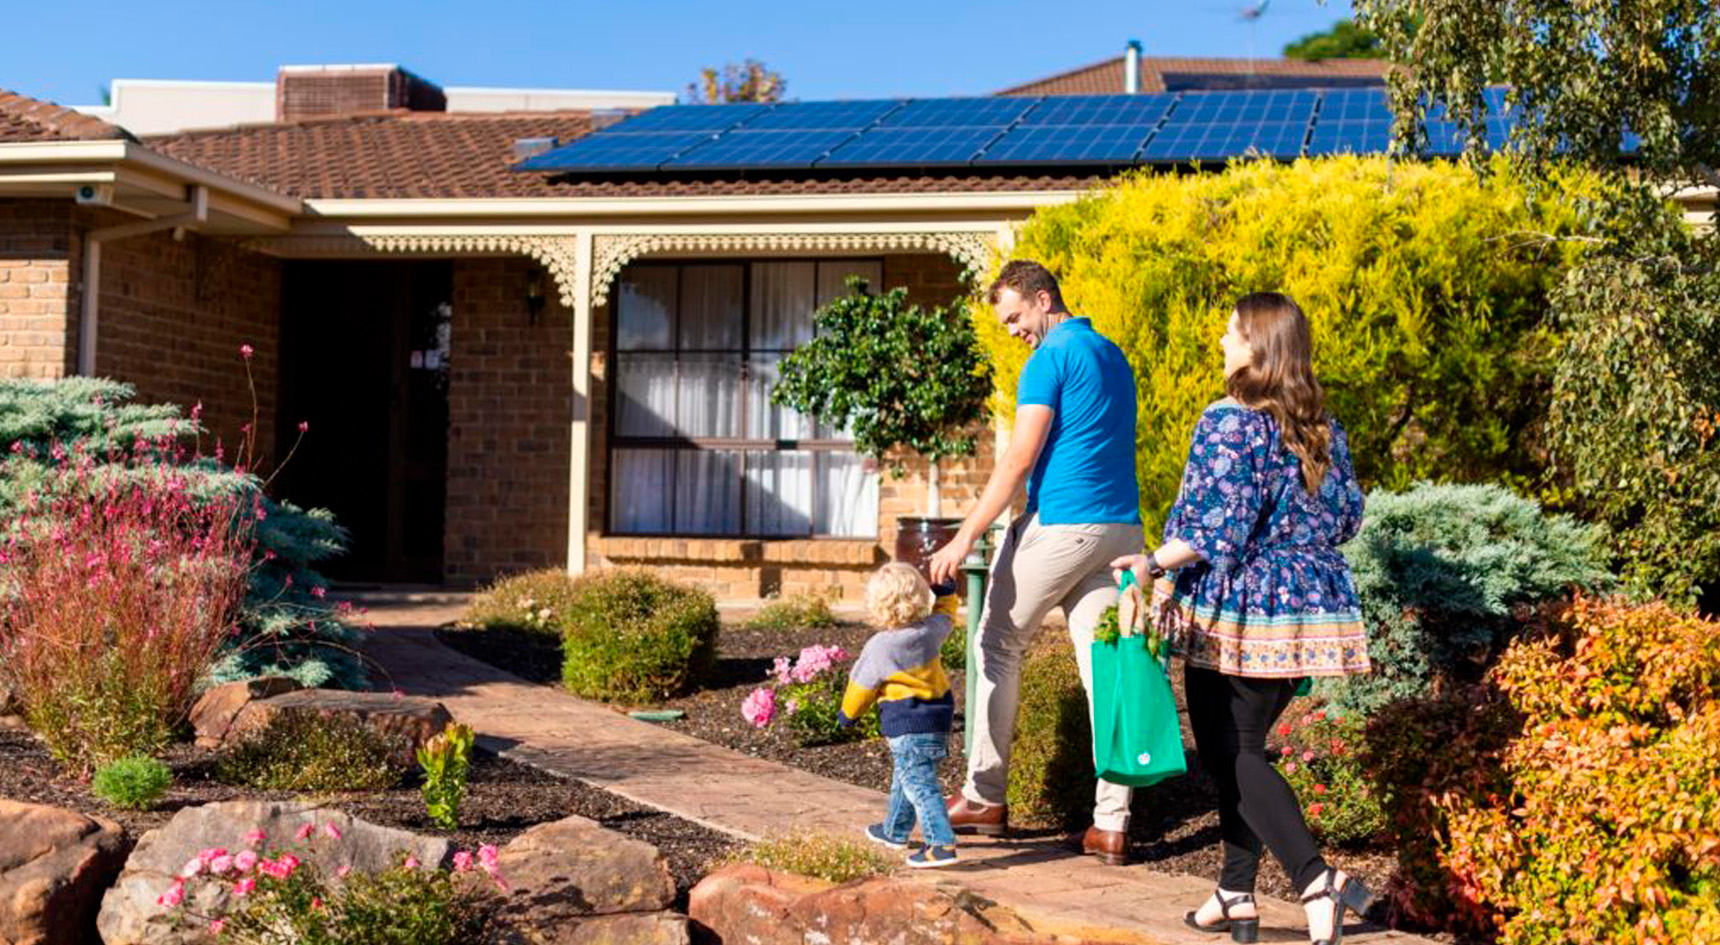 Family walking into house with solar panels on the roof. Image: RAA.